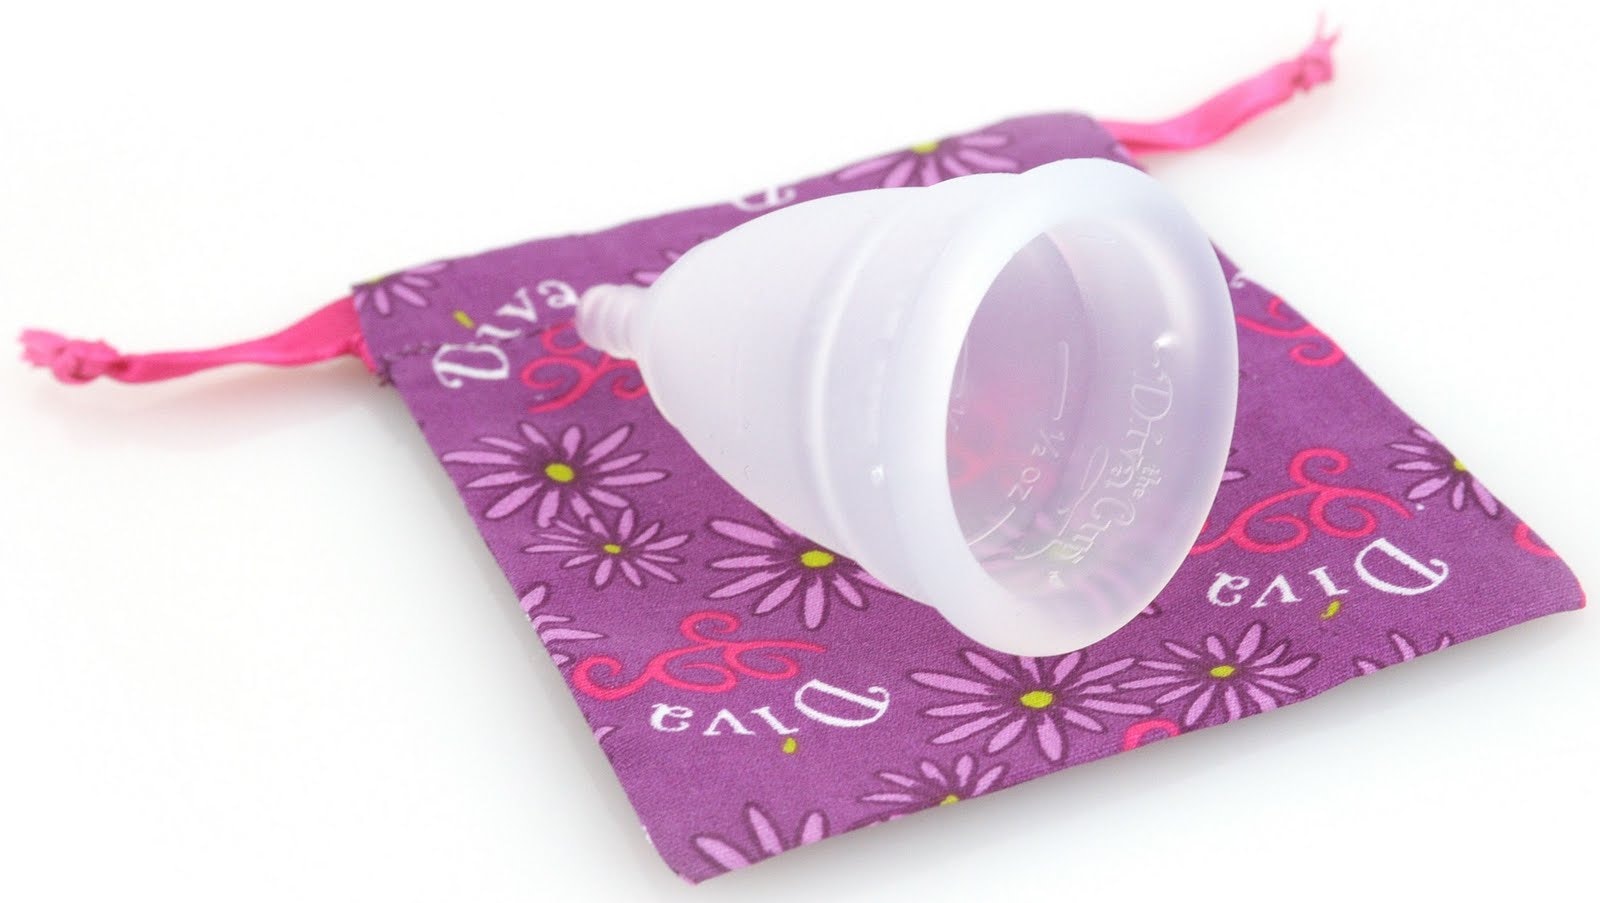 If you thought women have to remove a menstrual cup to pee, you